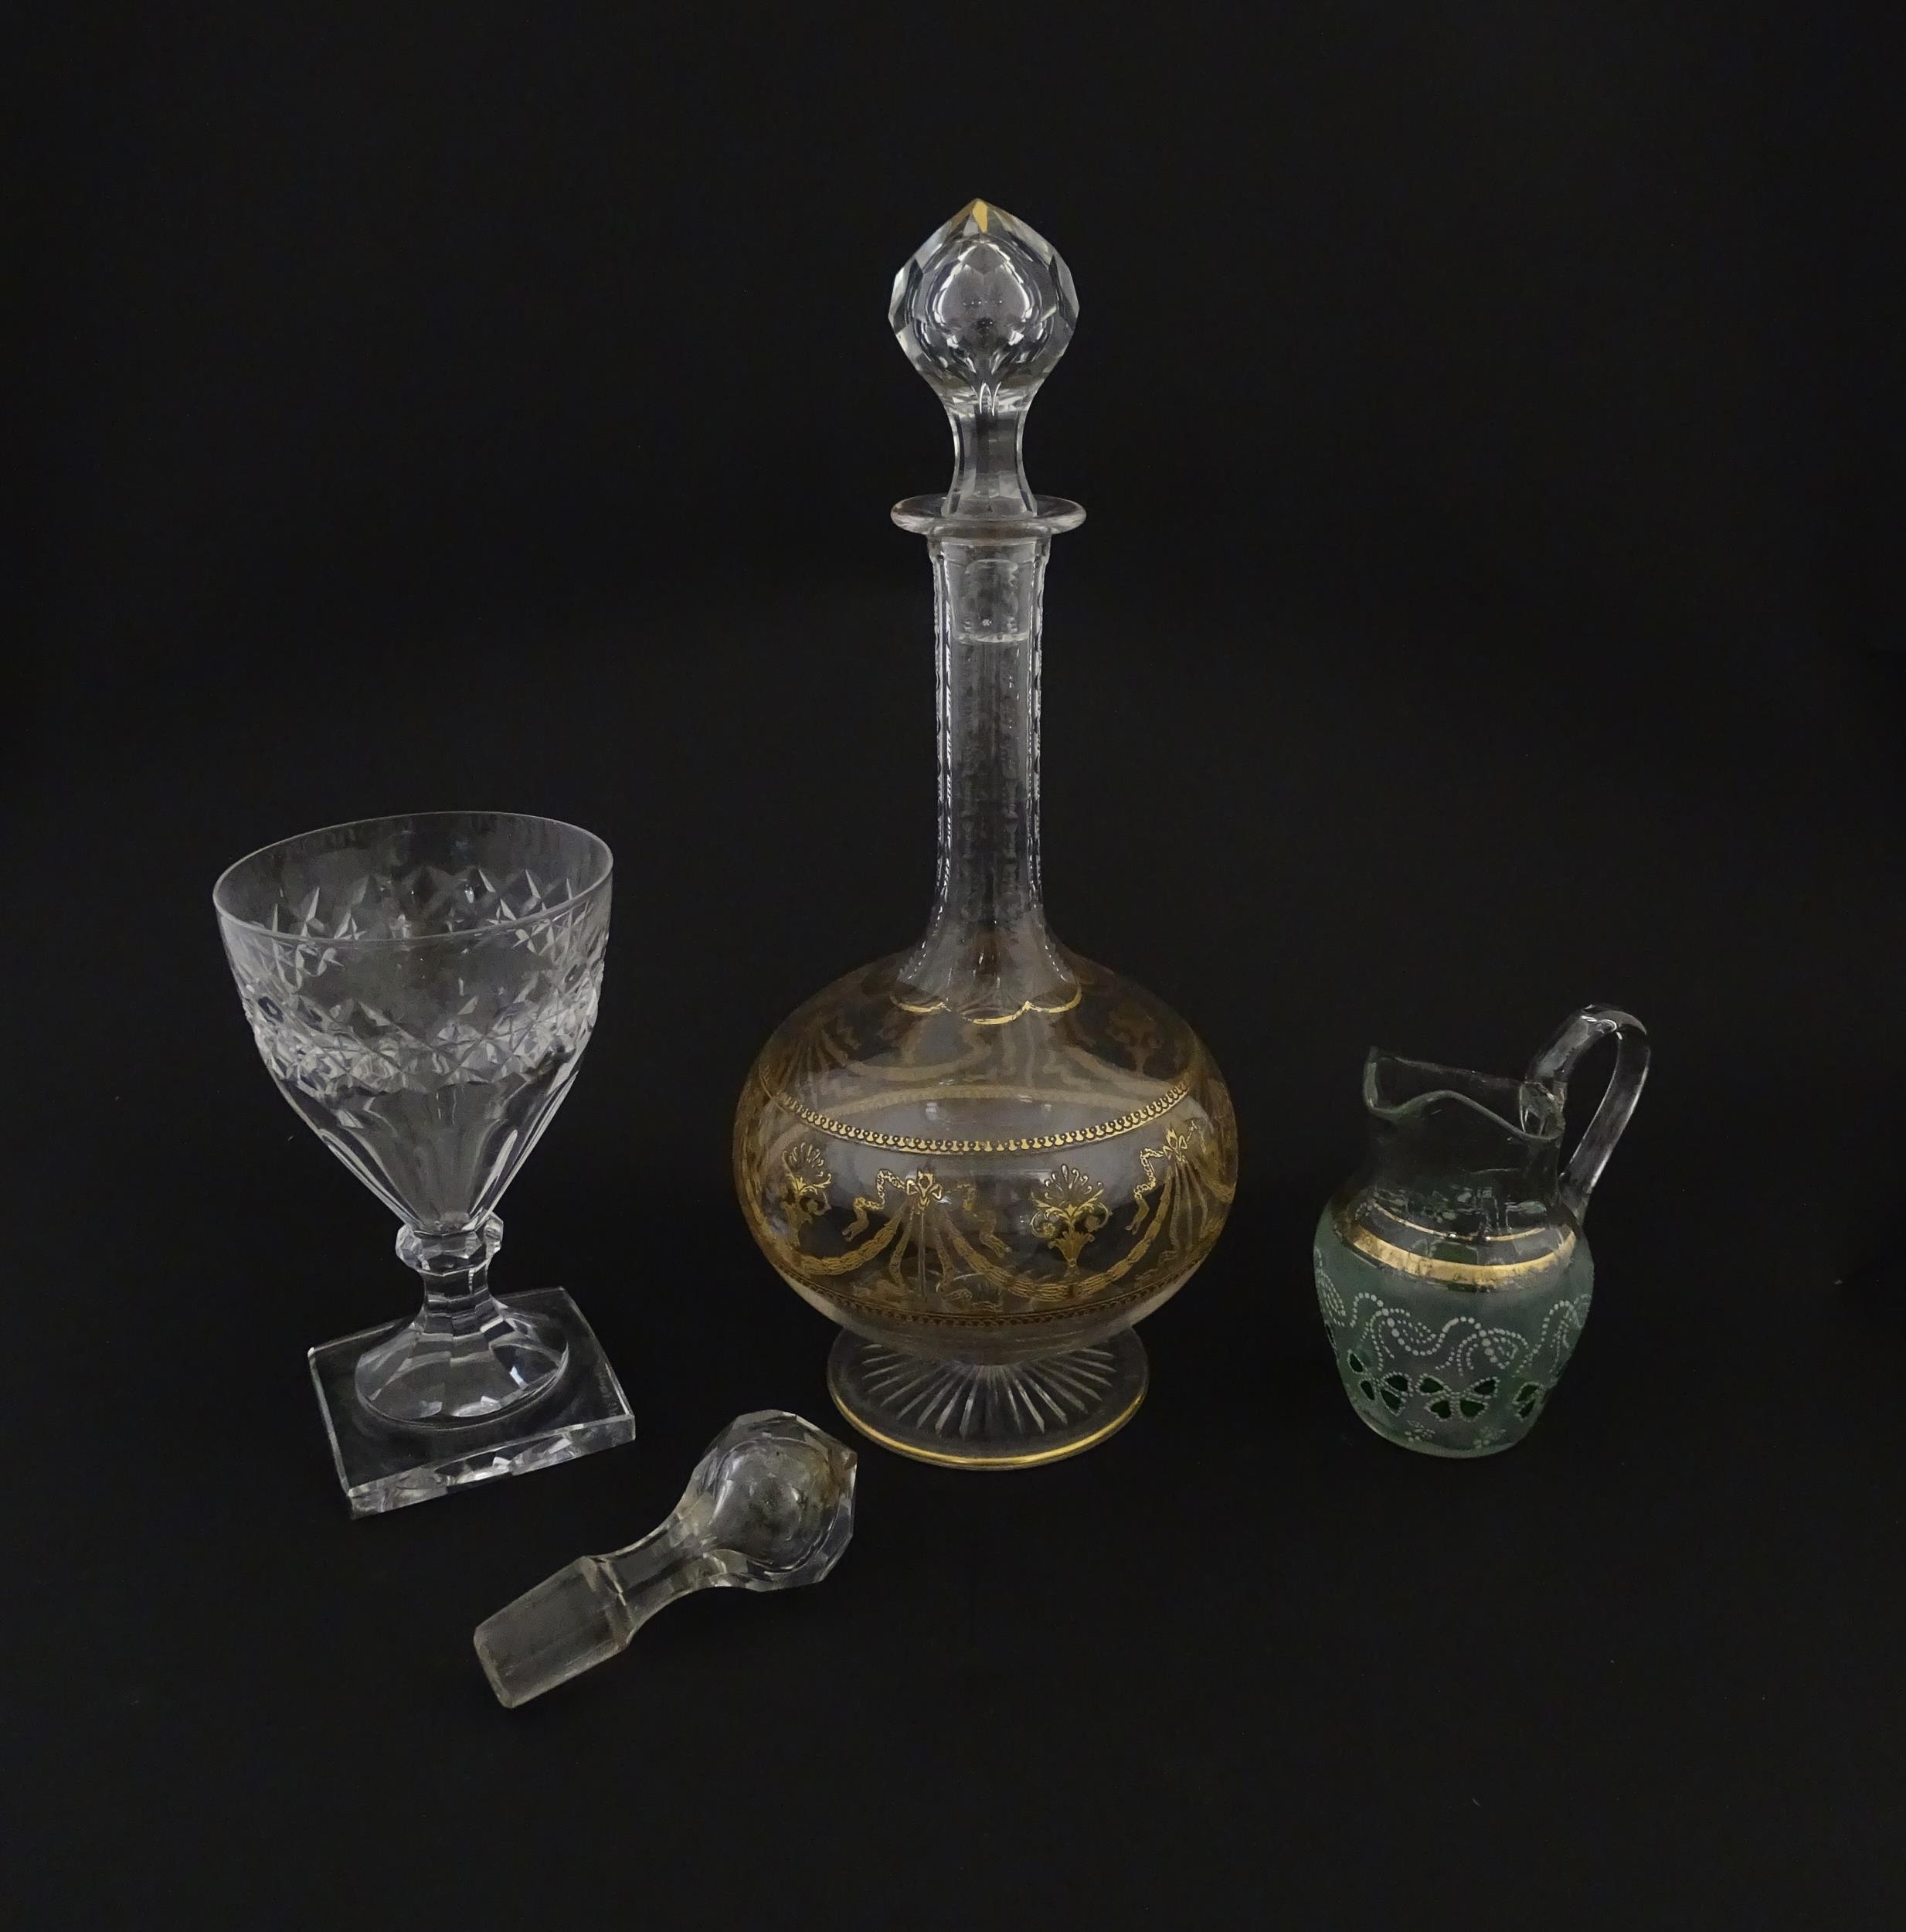 Three items of glassware comprising a Val Saint Lambert glass with squared foot, a decanter with